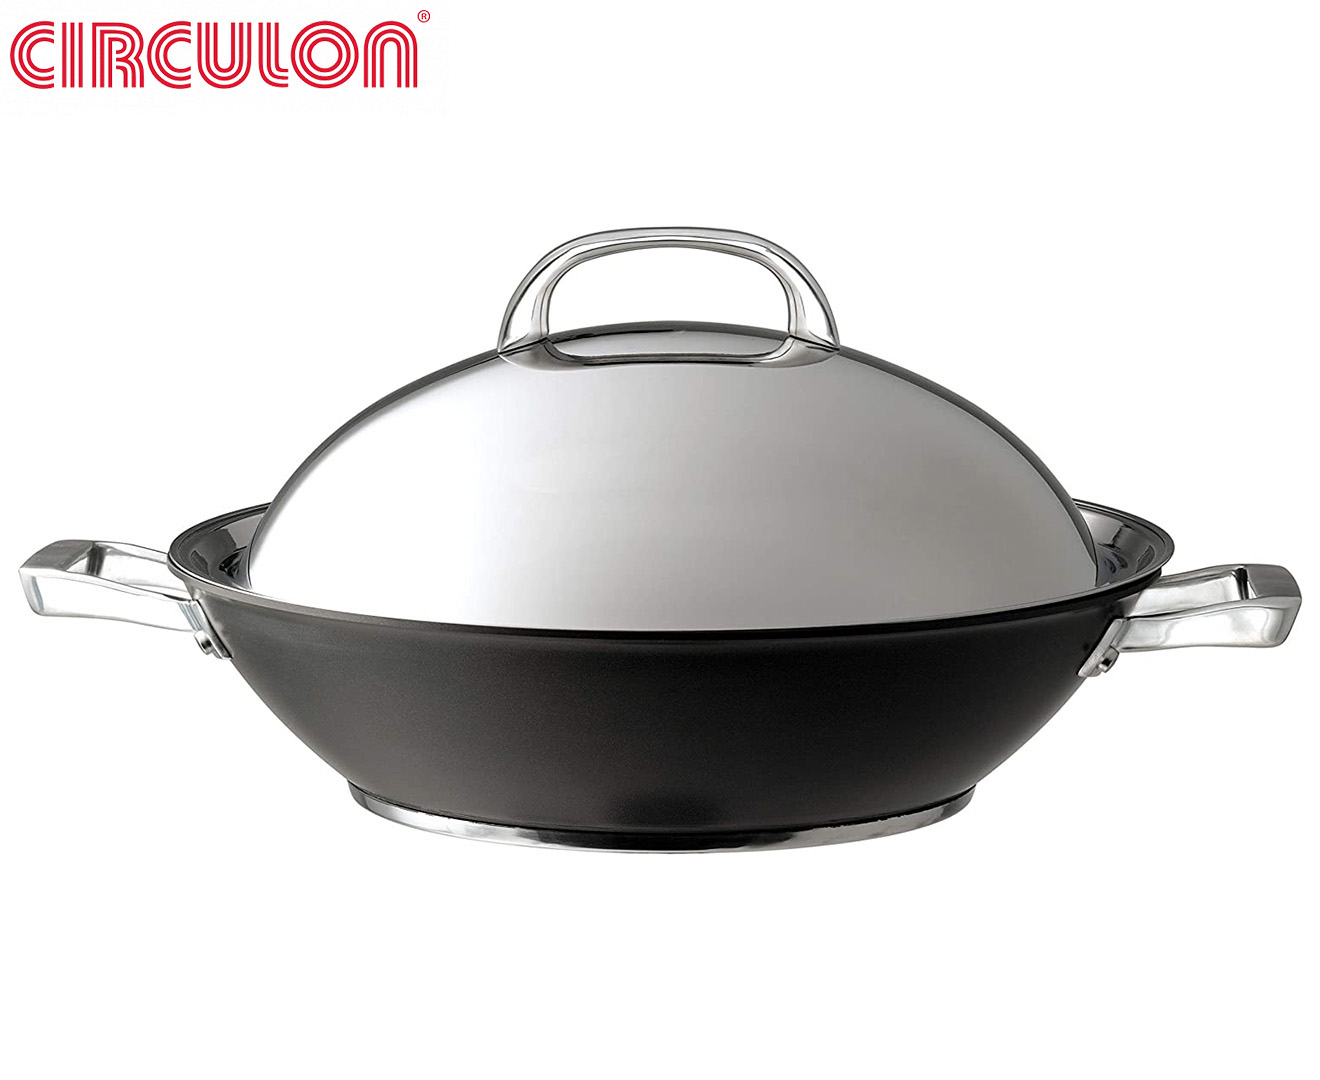 Hard Anodized Aluminium Cookware Saucepan and Frypan Set of 6 & Infinite Wok 36cm Circulon Infinite Milkpan Induction Non Stick Wok with Stainless Steel Lid 